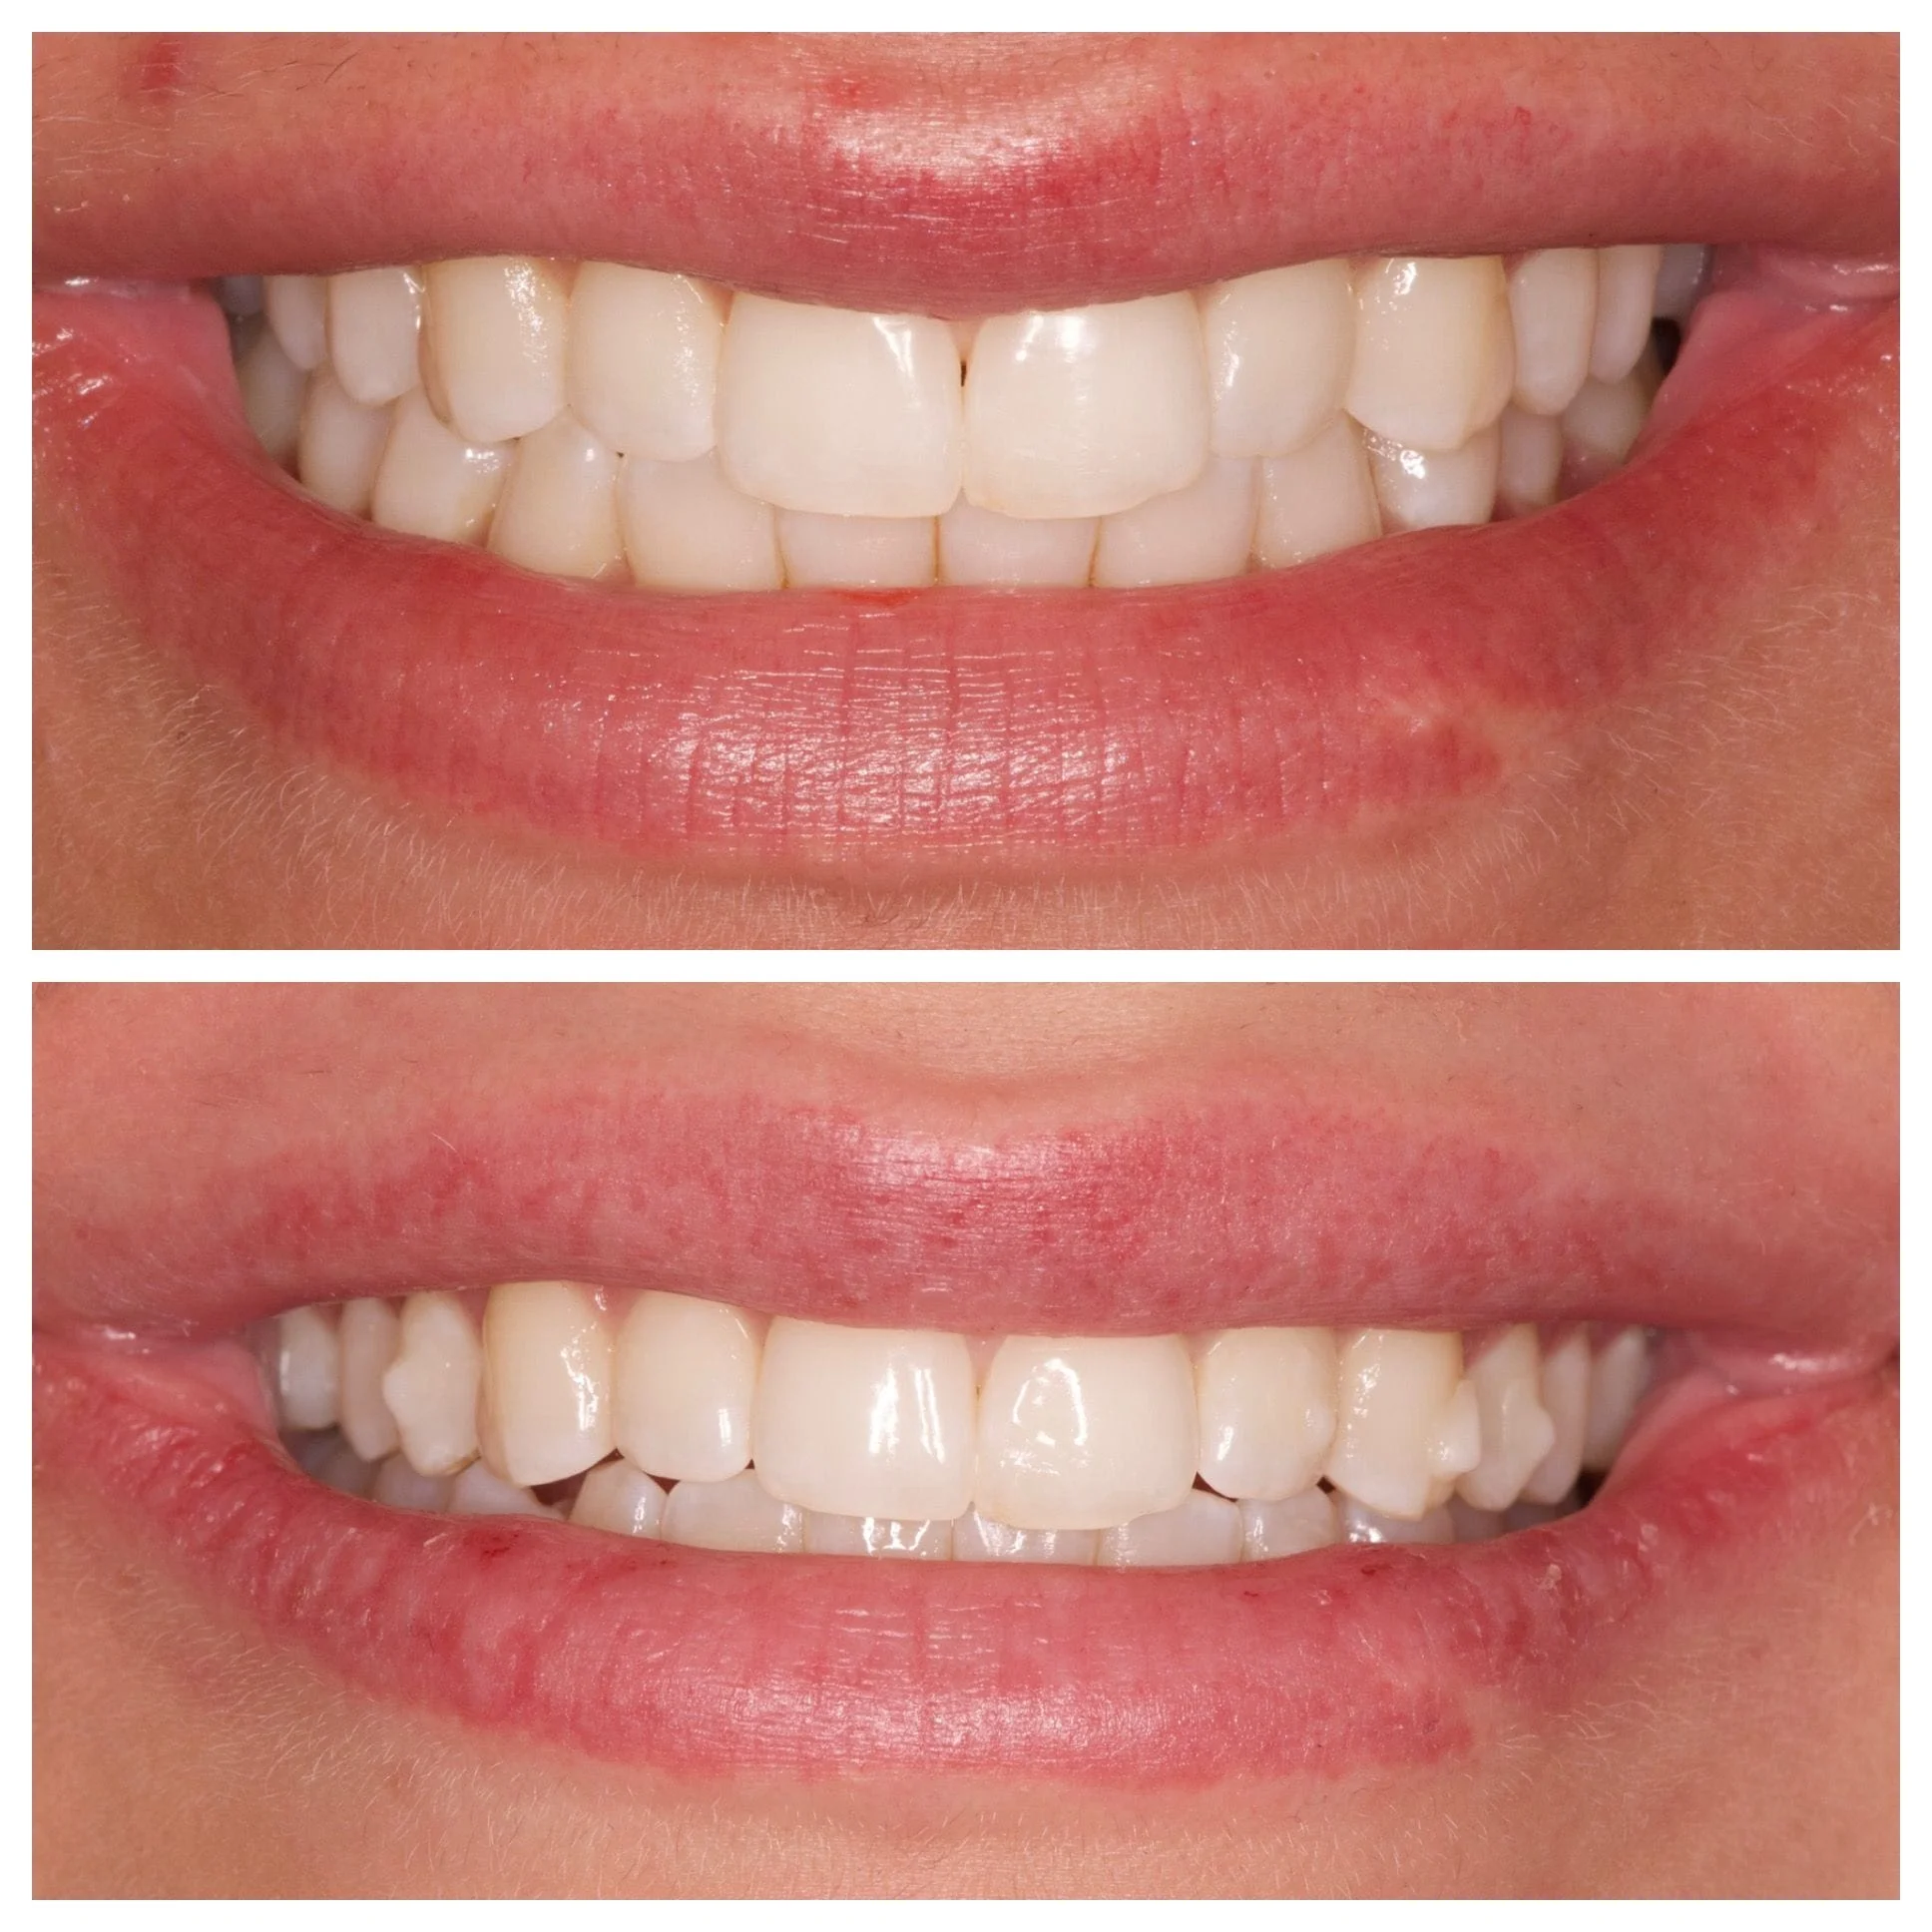 10 WEEK INVISALIGN FOR VERY MINOR SMILE ENHANCEMENT